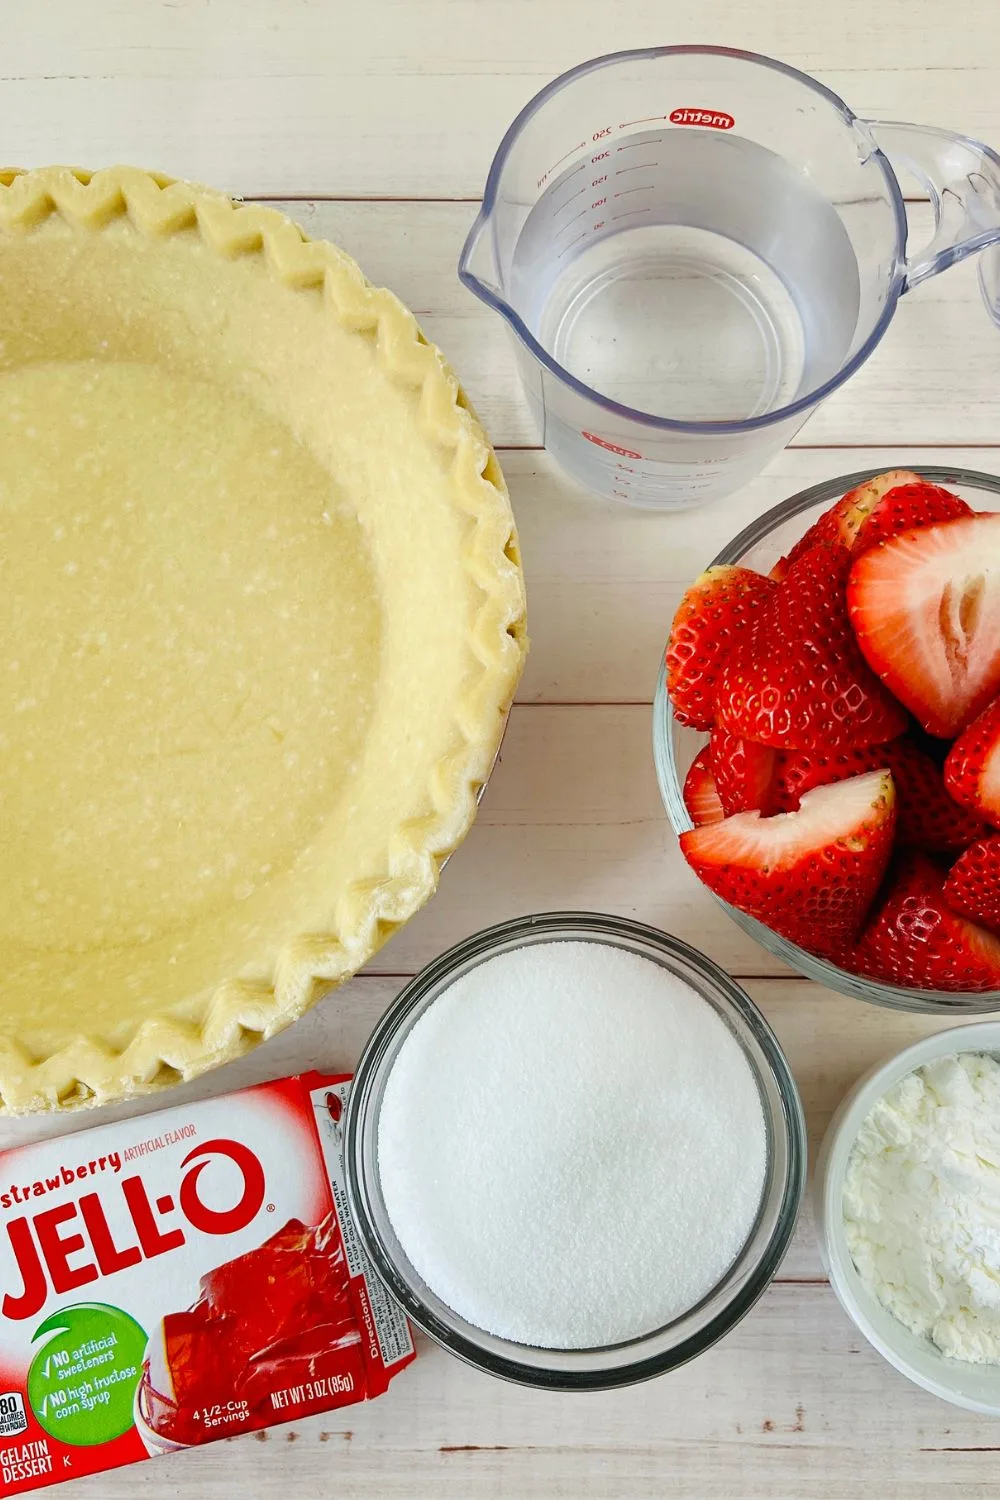 ingredients for a strawberry pie with jello